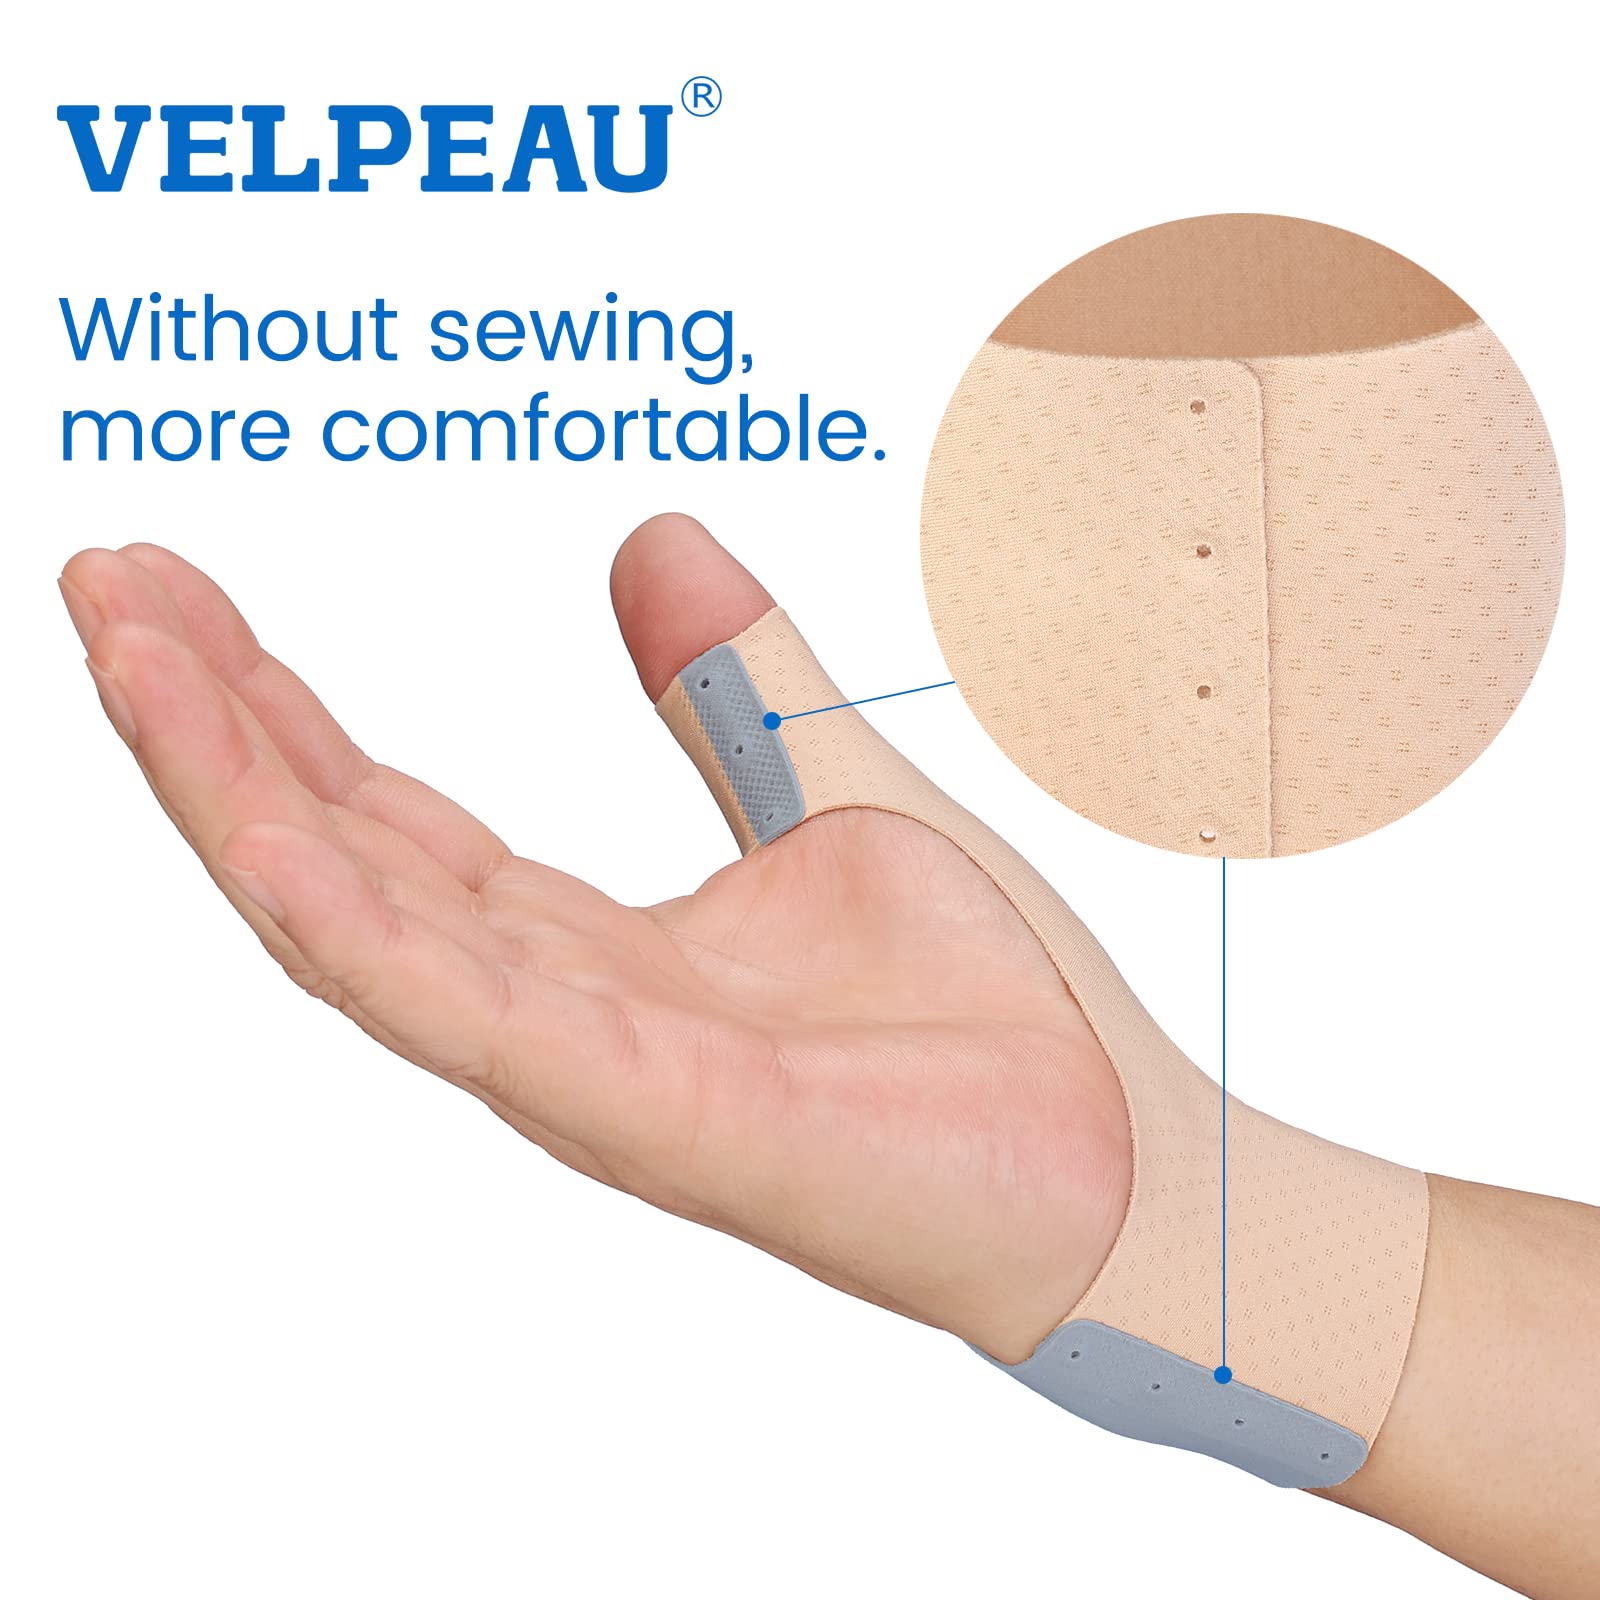 Velpeau Elastic Thumb Support Brace Liner (Pack of 2) - Waterproof Soft Thumb Compression Sleeve Protector for Relieving Pain, Arthritis, Joint Pain, Tendonitis, Sprains, Sports (Medium)